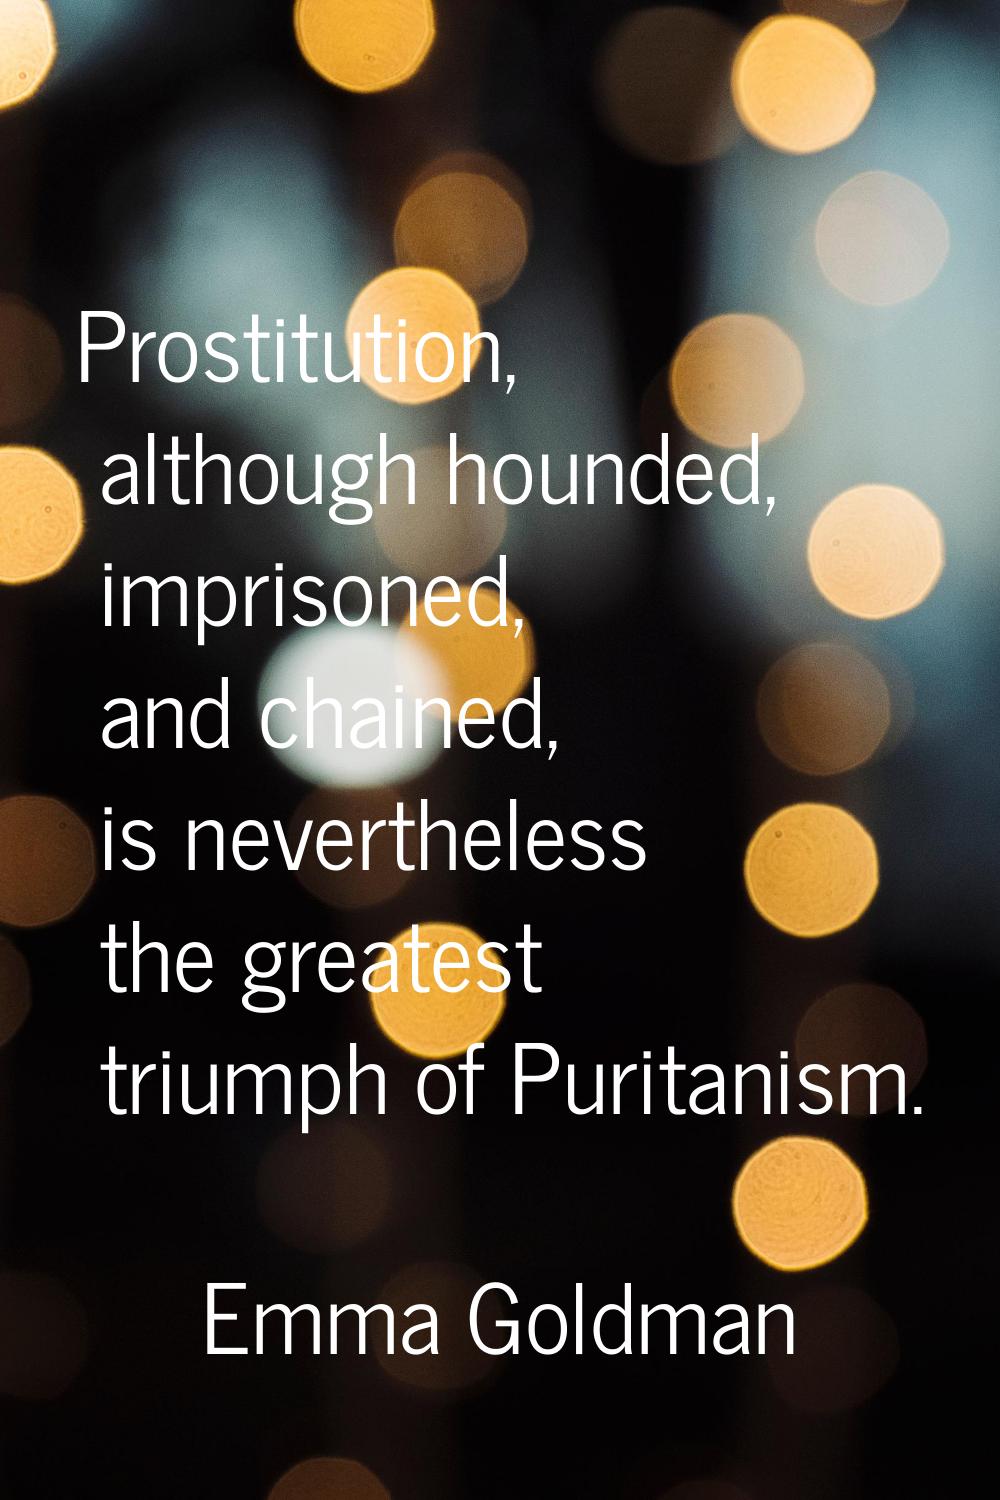 Prostitution, although hounded, imprisoned, and chained, is nevertheless the greatest triumph of Pu